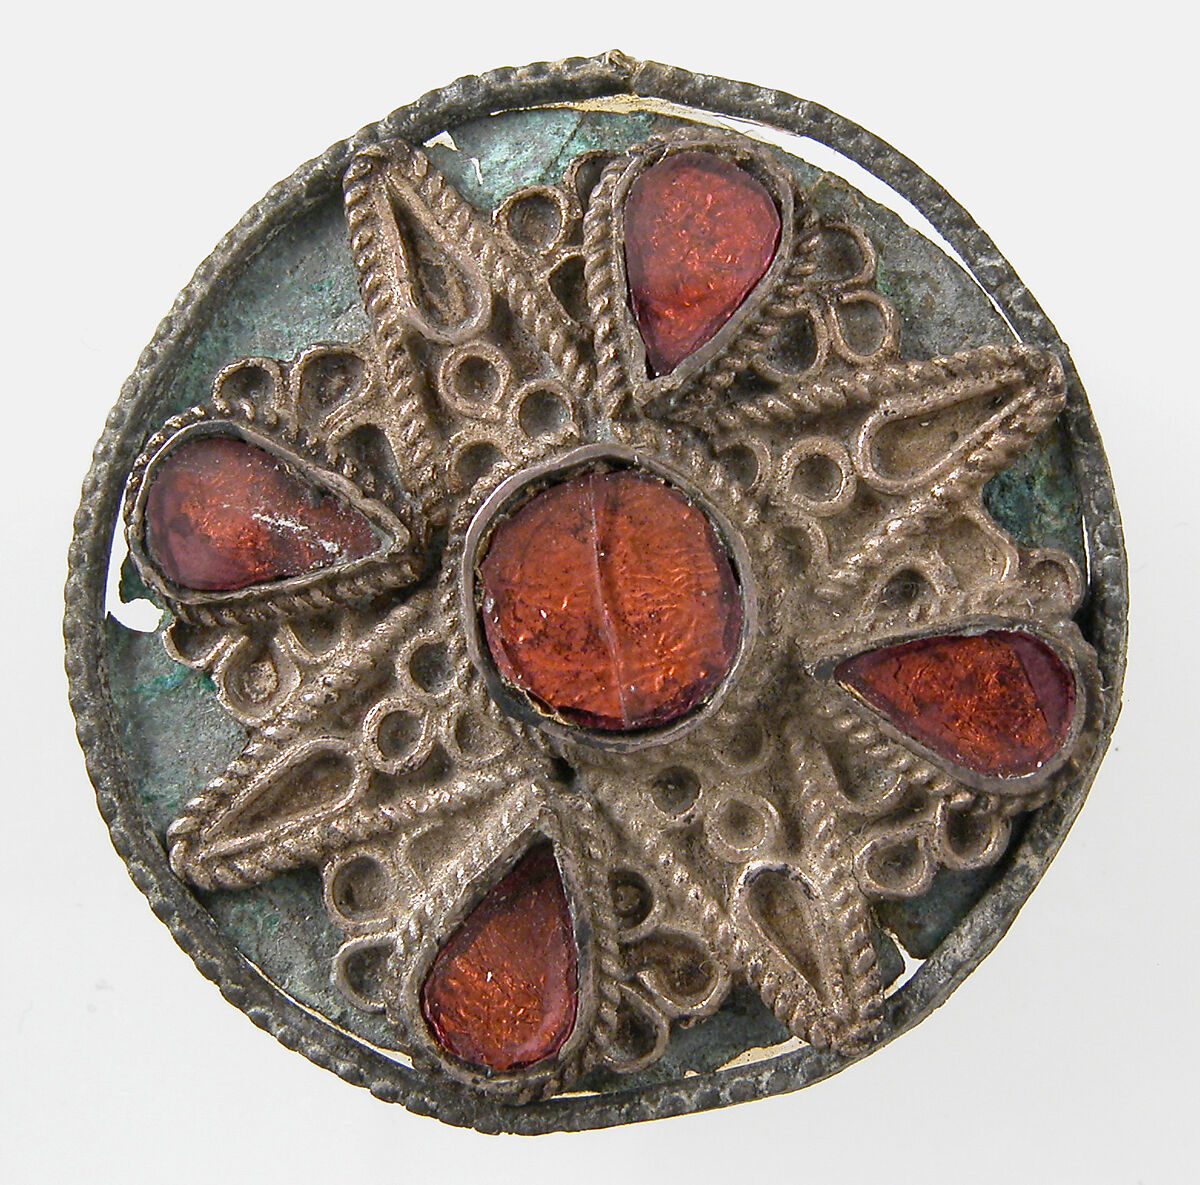 Disk Brooch, Copper alloy, silver wire, glass paste, remnant of iron pin, Frankish or Northern French 